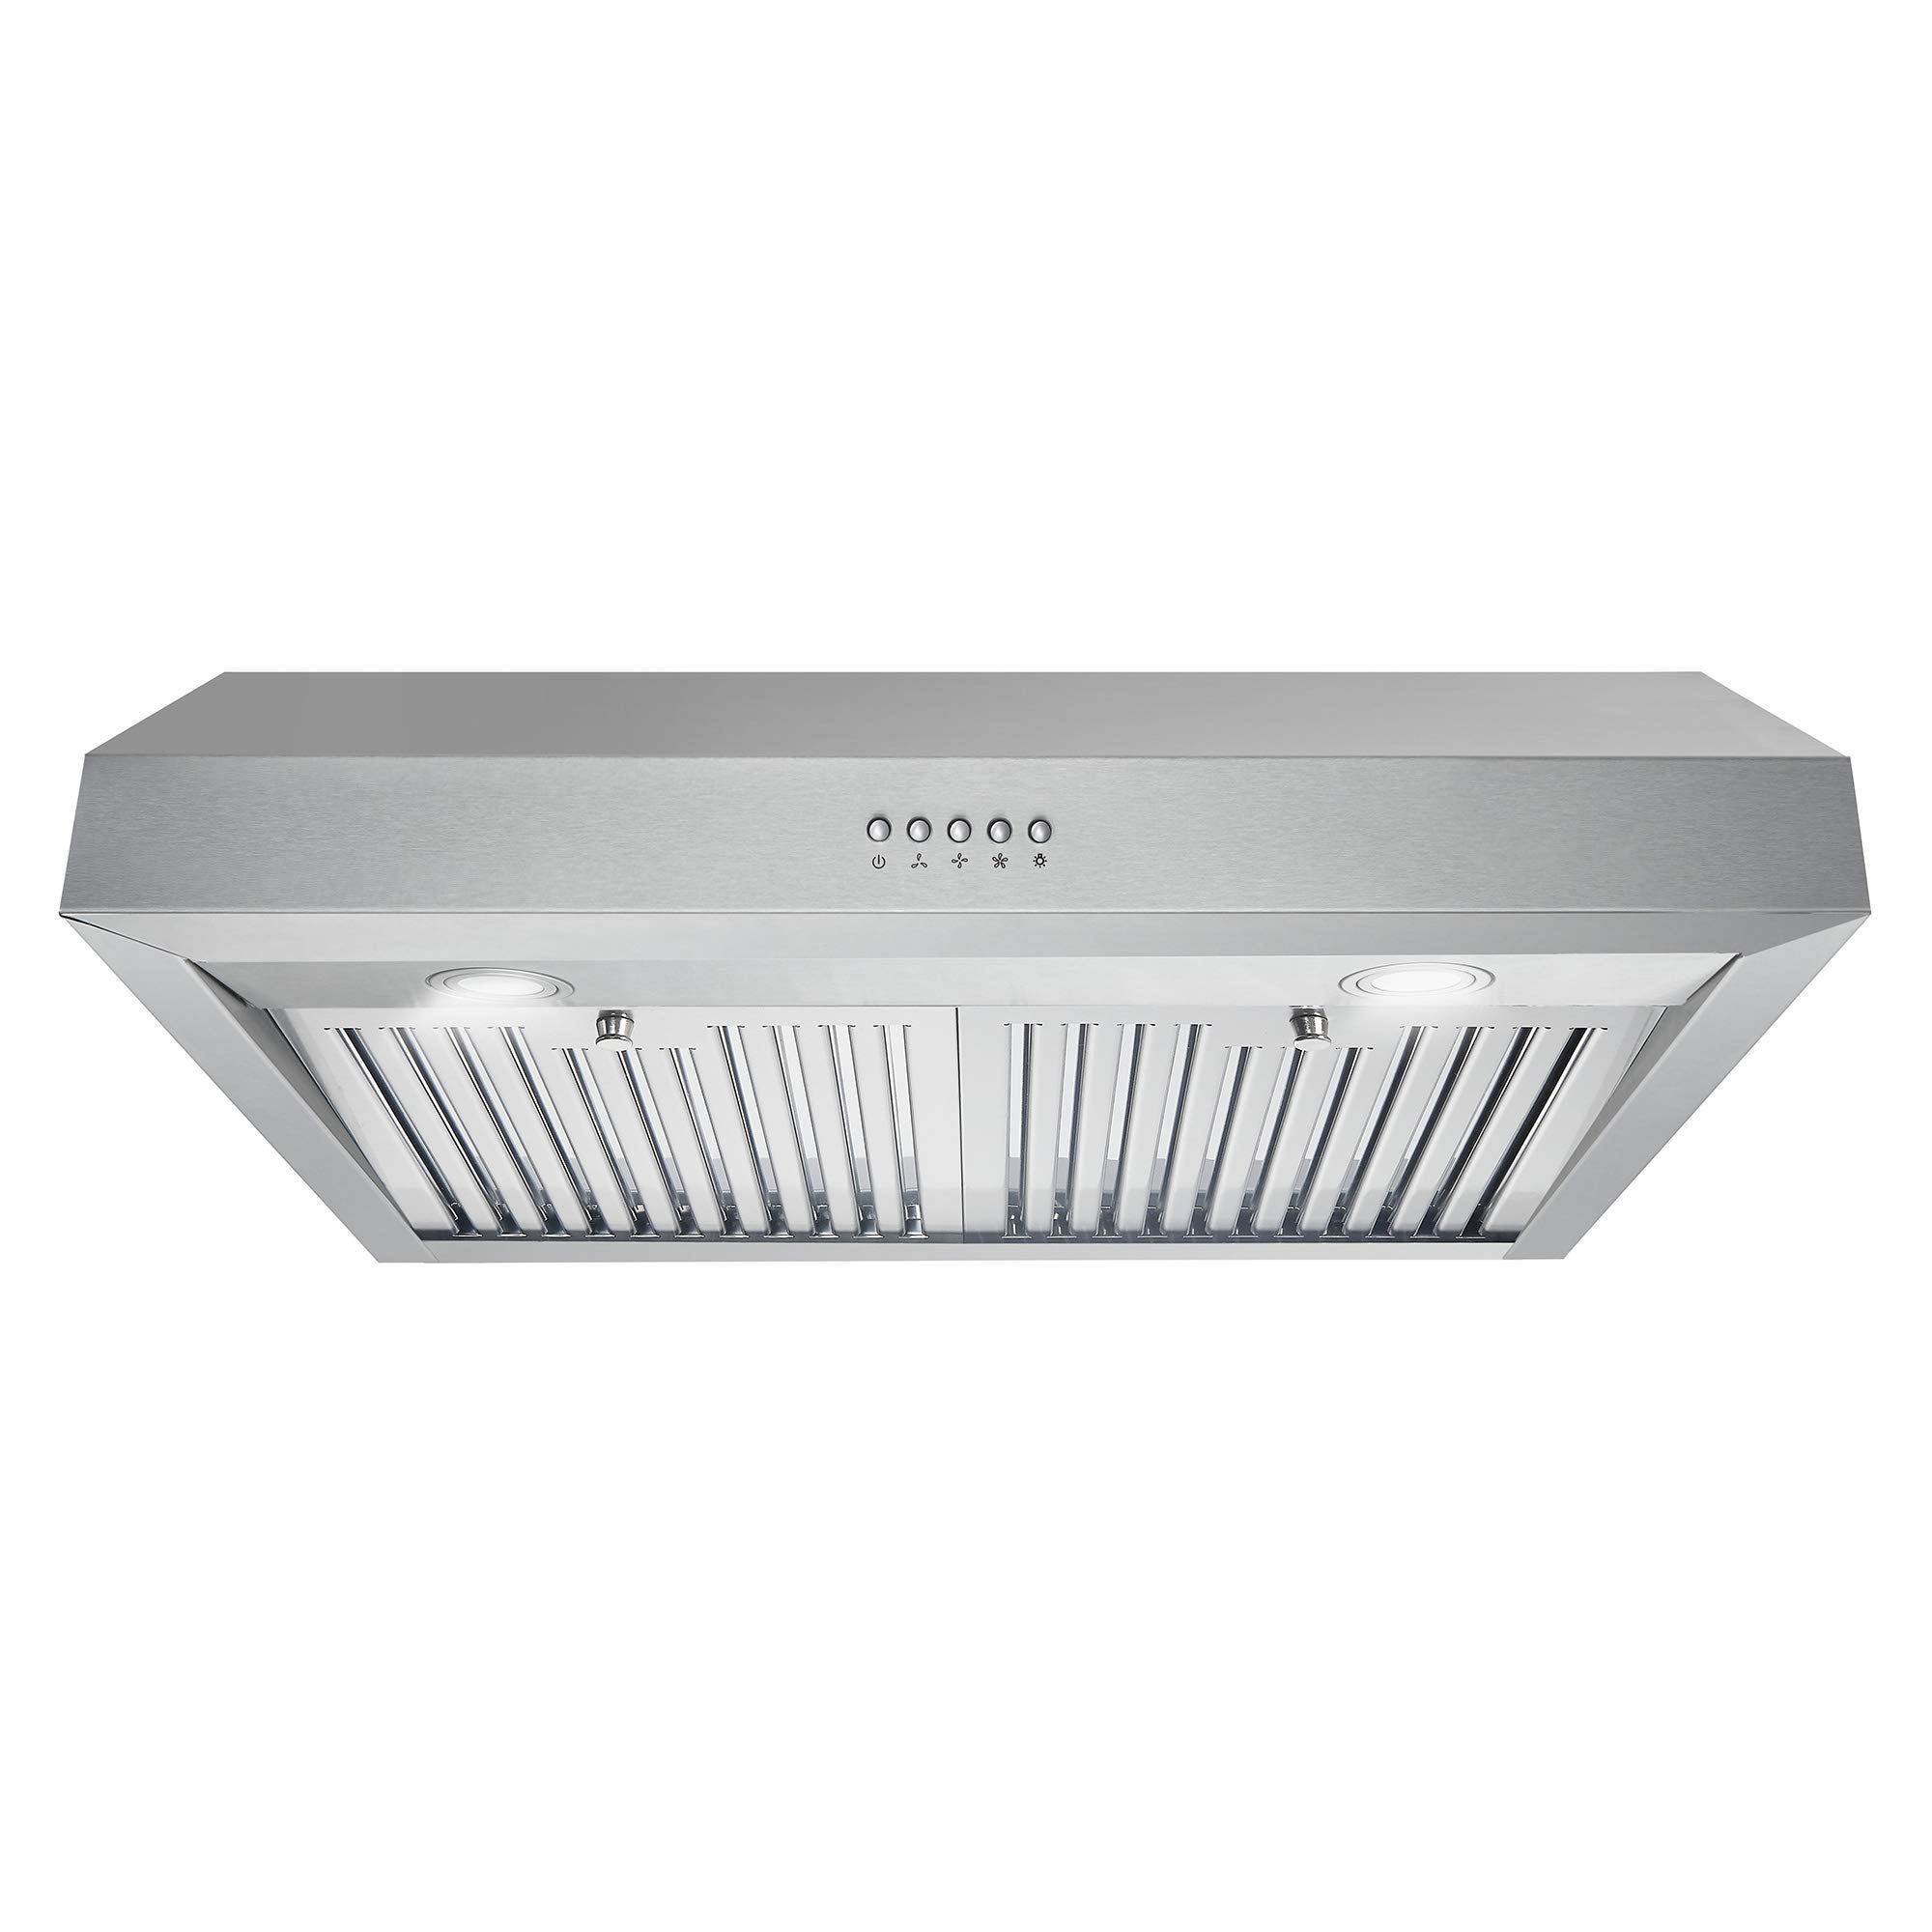 Cosmo UC30 30 in. Ducted Under Cabinet Range Hood, Kitchen Over Stove Vent, 3-Speed Fan, Permanent Filters, LED Lights in Stainless Steel, 30 inch